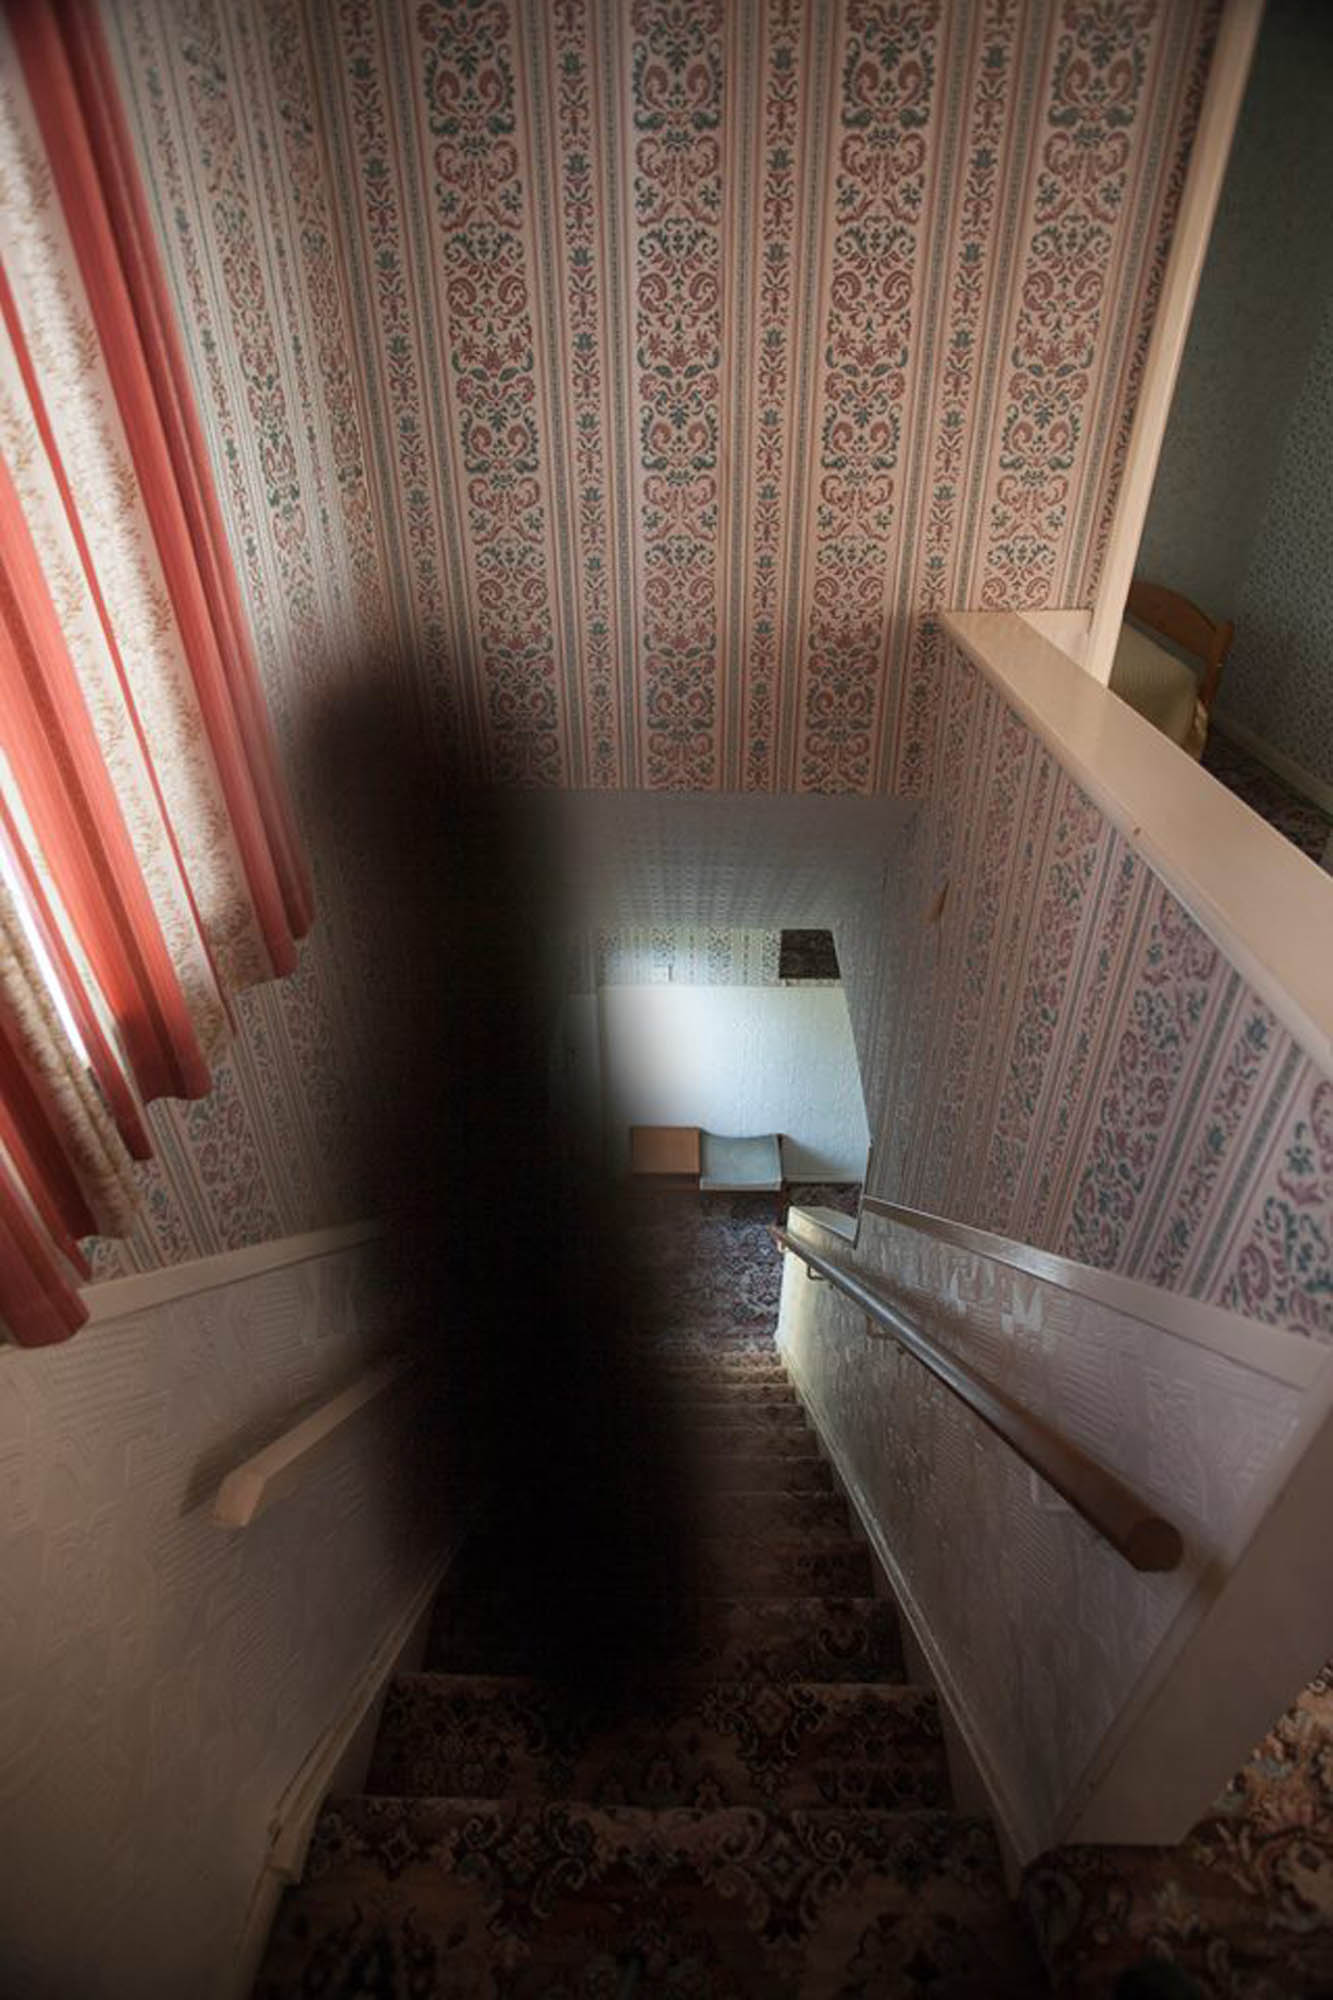  Image of a “blacker than black” shadow on the stairs of the house, from the  30 East Drive website .  Photo taken by visitor Craig L. 